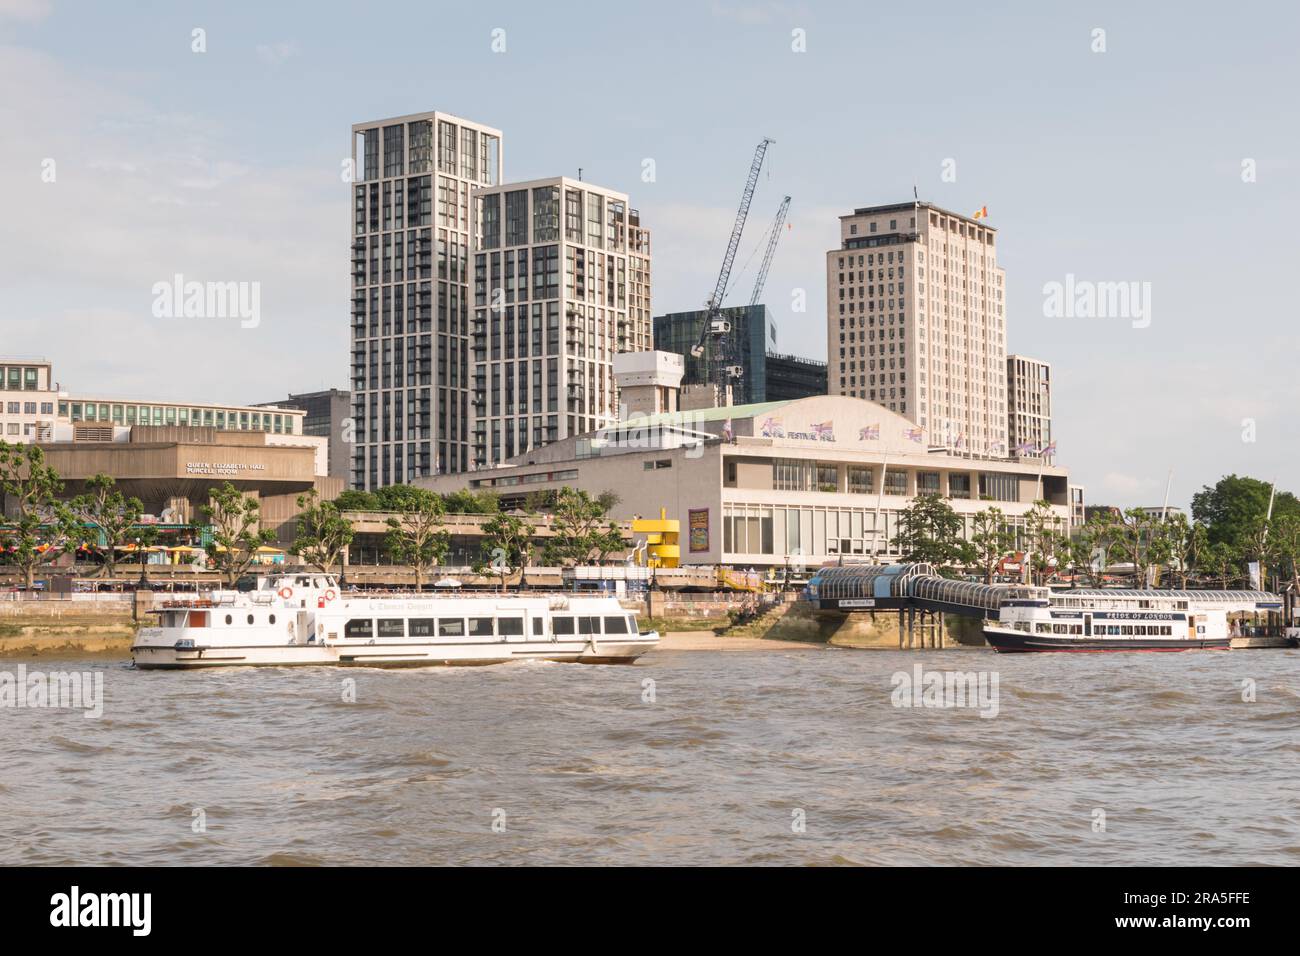 The Royal Festival Hall and Shell House on the Southbank of the River Thames with encroaching skyscrapers in the background, London, England, U.K. Stock Photo